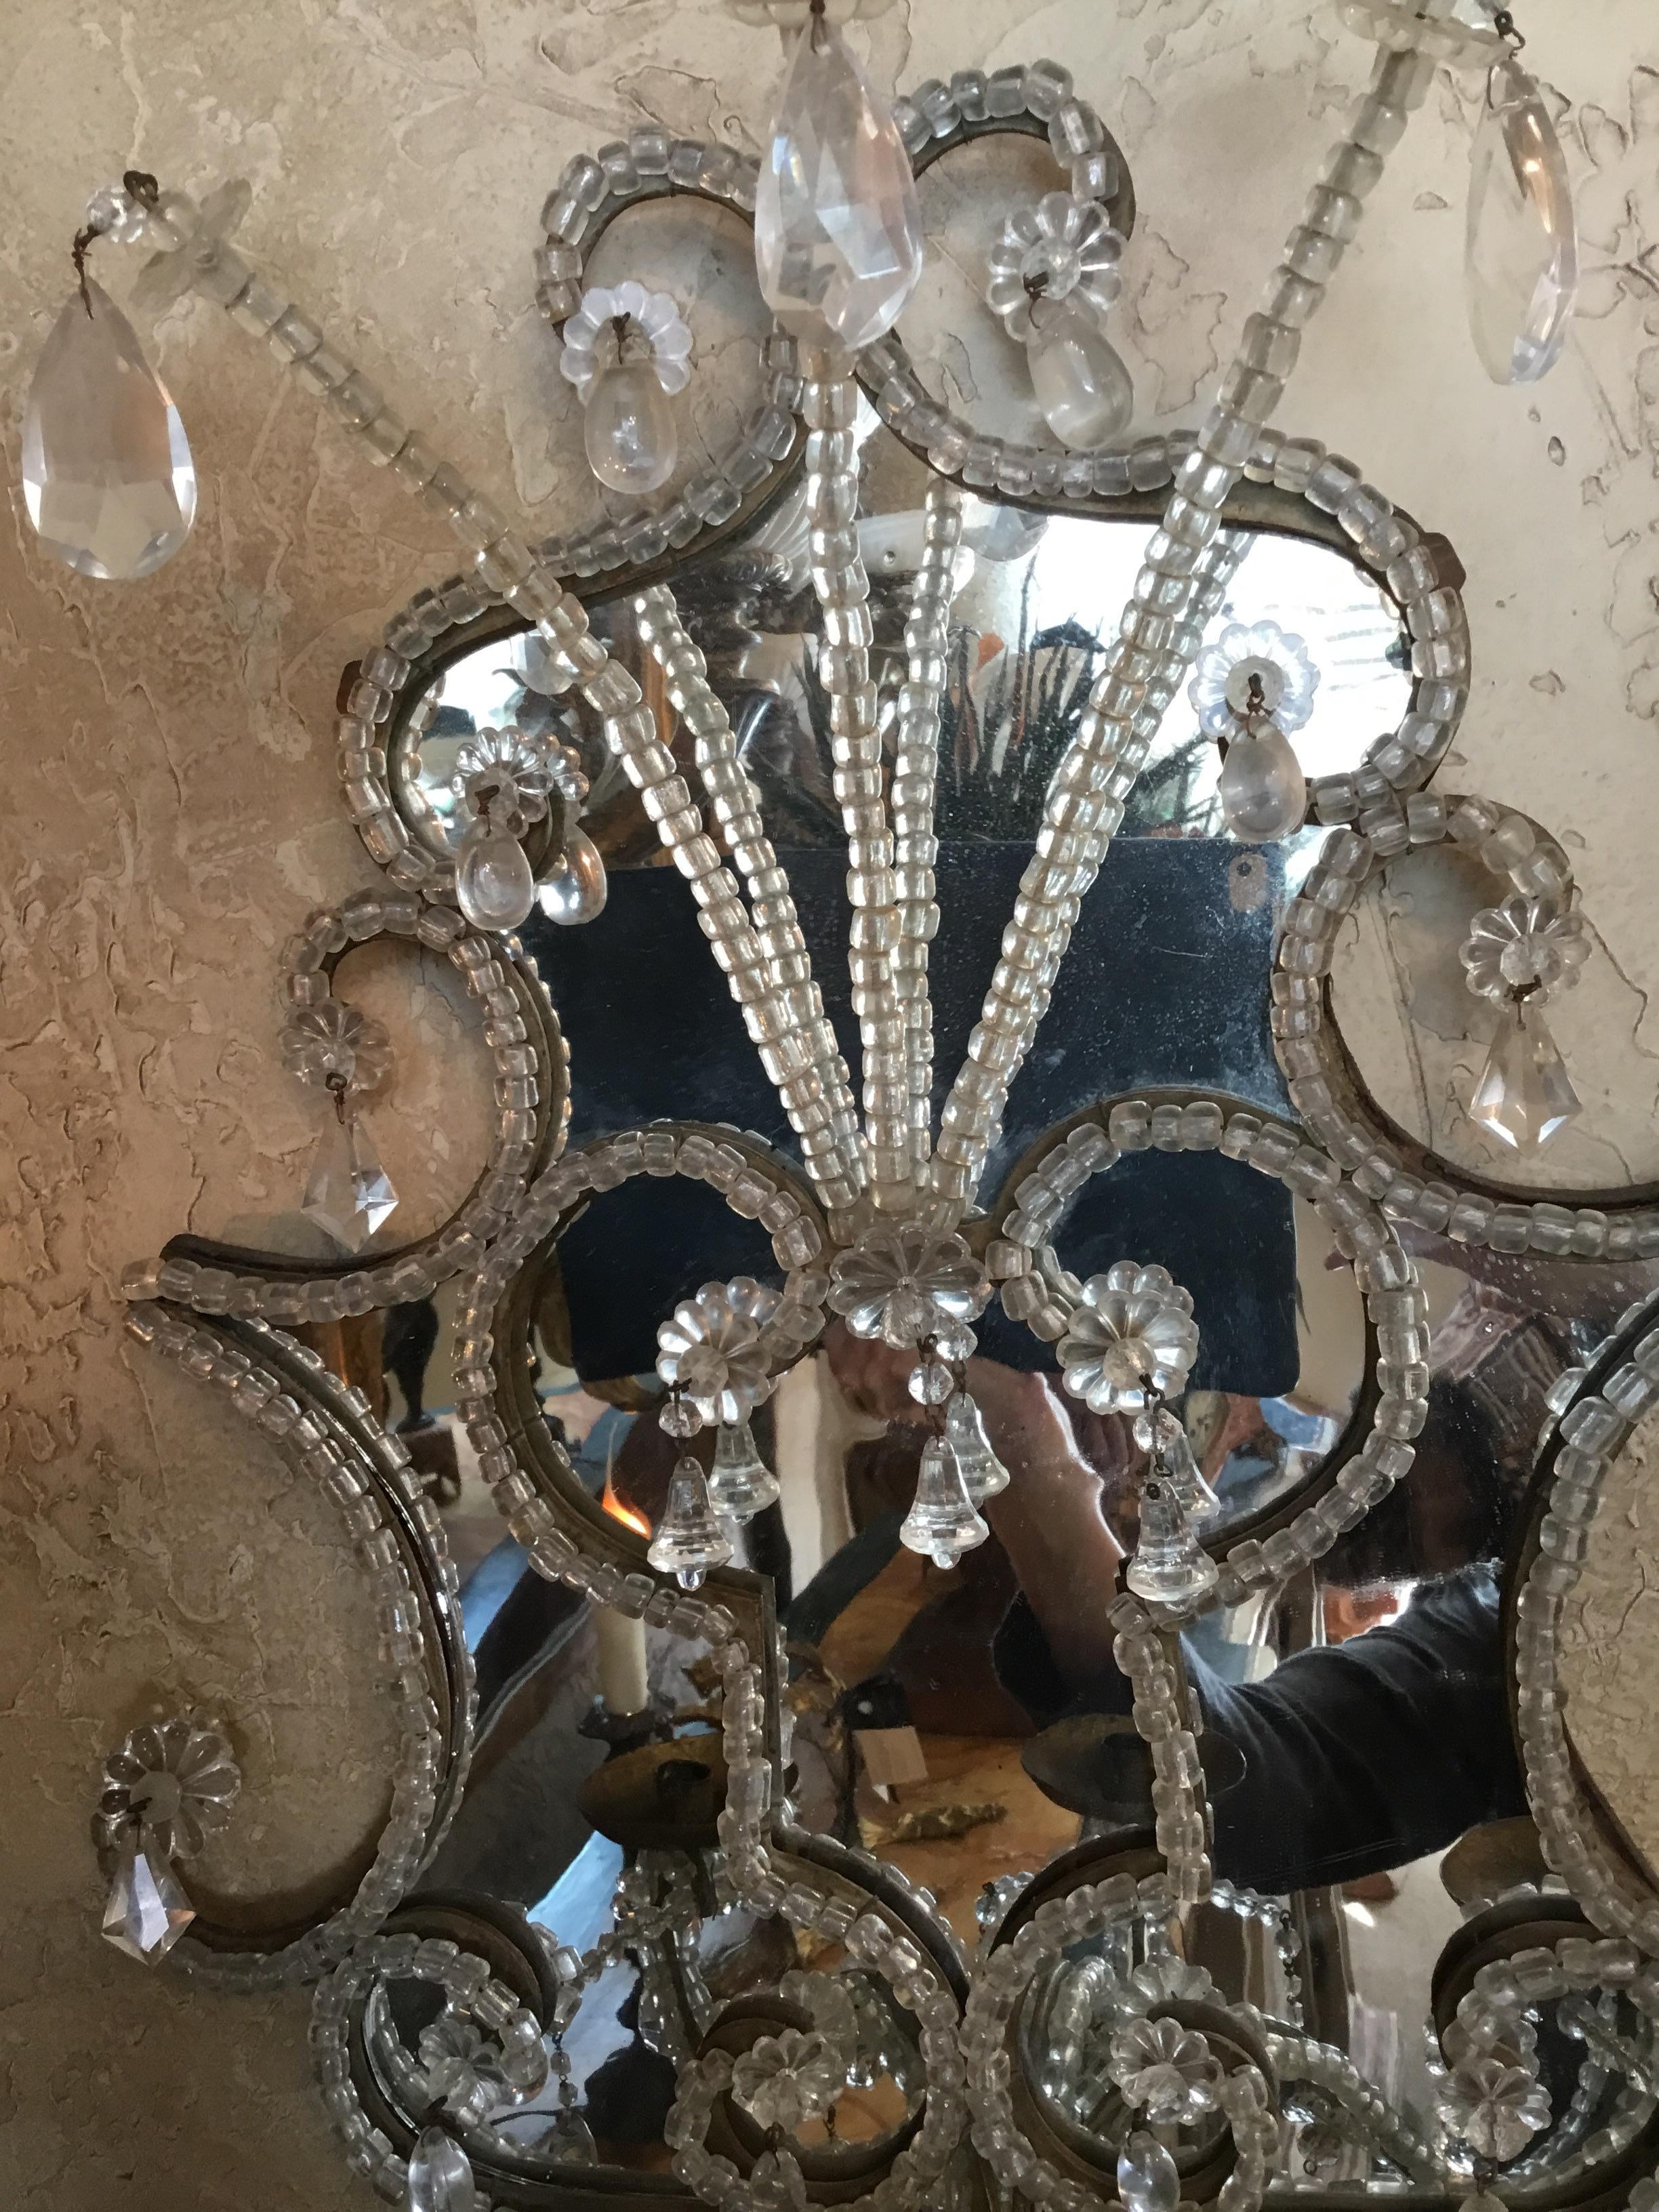 Impressive large and exquisite sconces for candles.
Early 19th century , beading and petite crystal bells adorn these
Beautiful sconces.